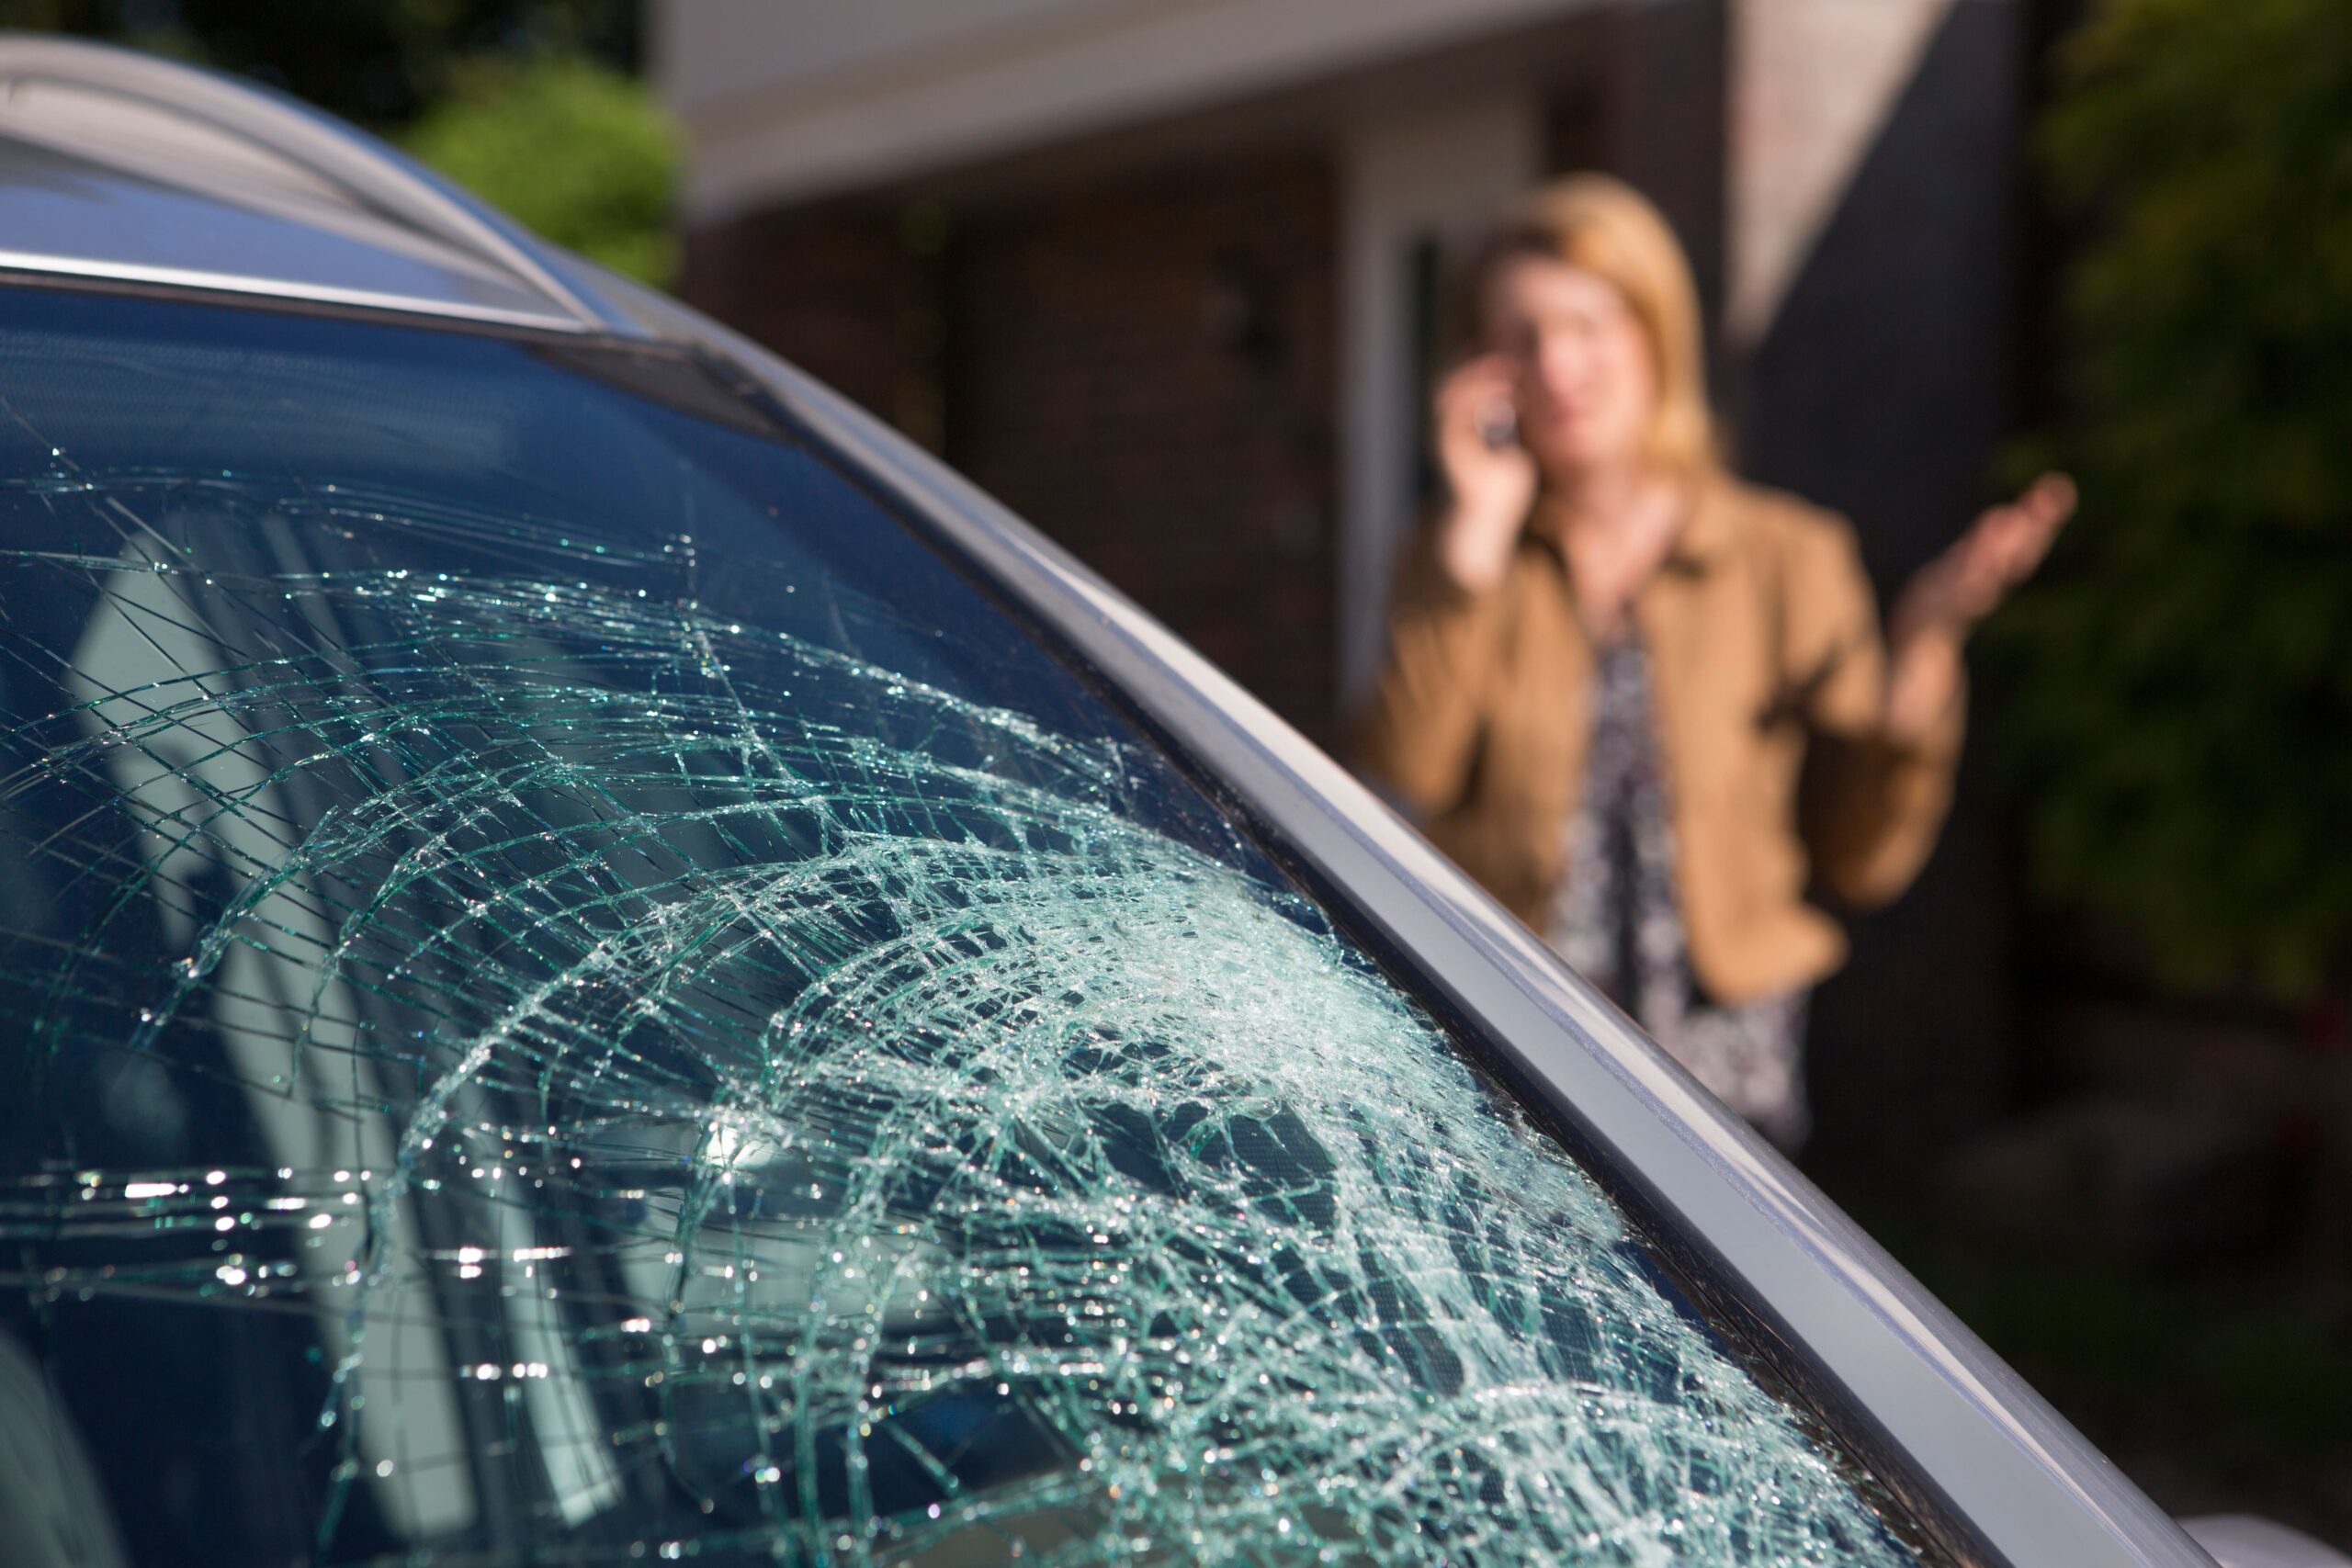 5 Top Causes of a Broken Windshield and How to Prevent Them